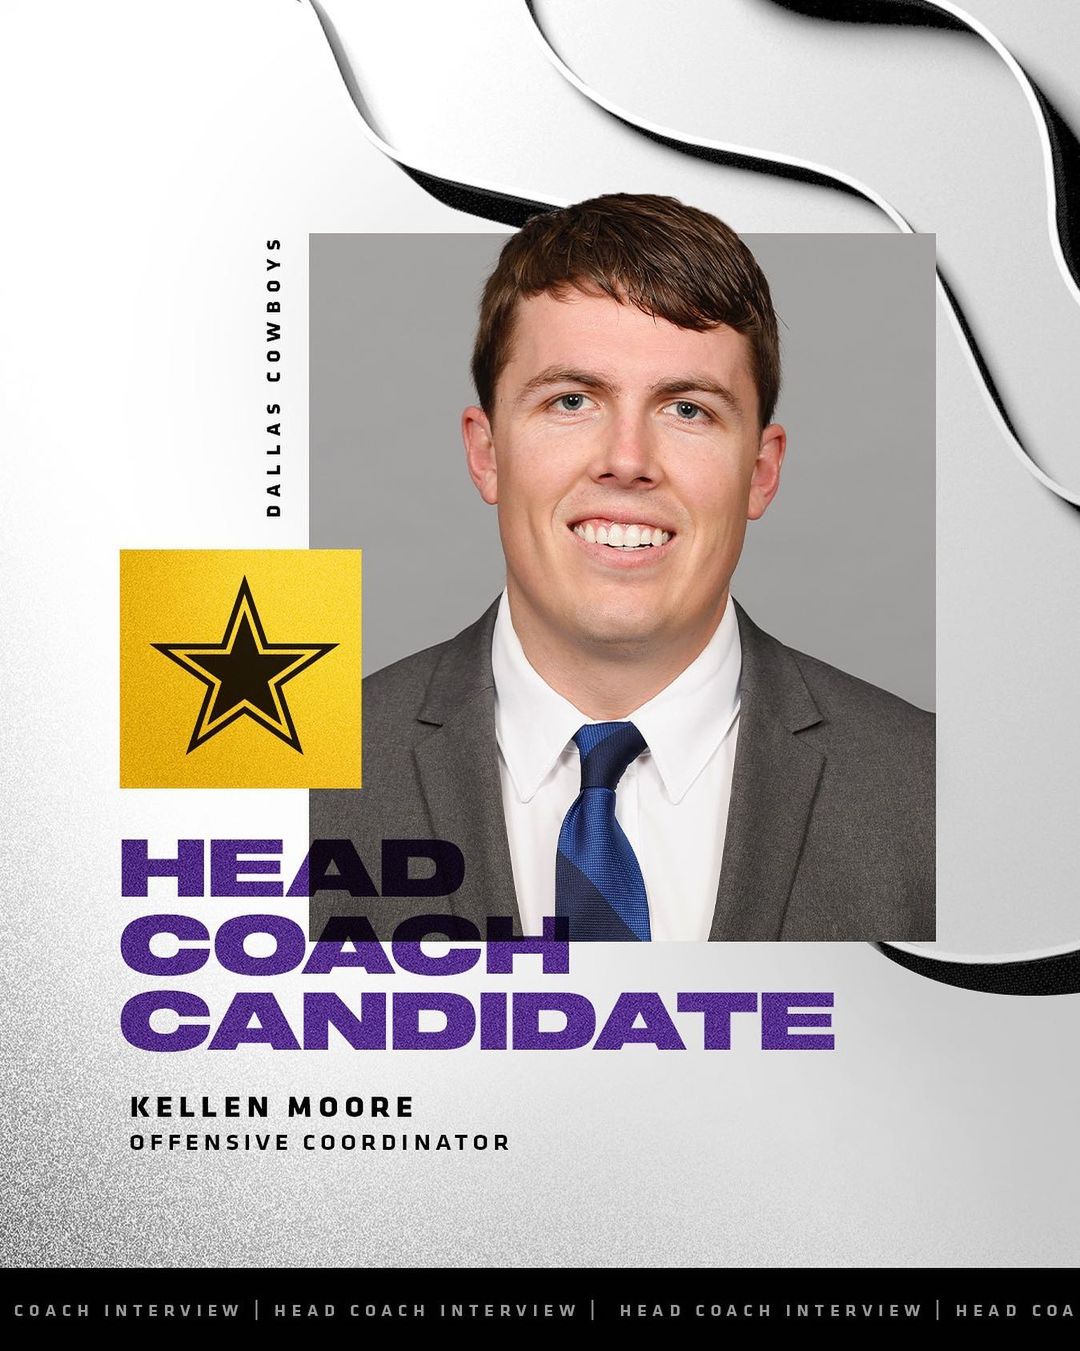 We have completed an interview with Cowboys Offensive Coordinator Kellen Moore f...